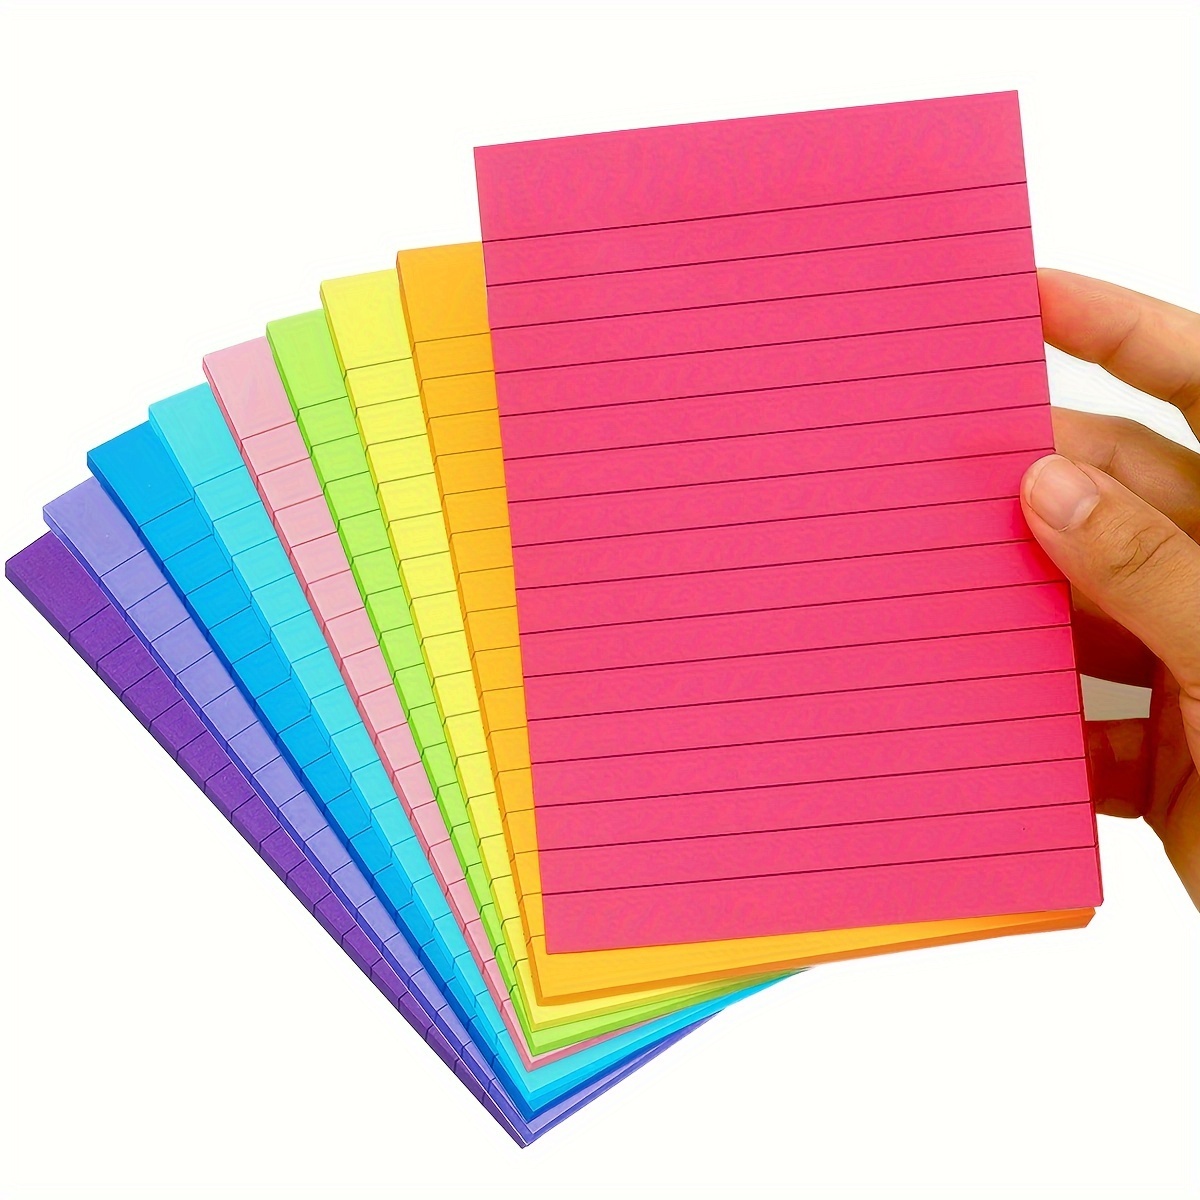 EOOUT 8 Pads Pastel Lined Sticky Notes 3x3 Inches Self-Stick Note Pads, 100  Sheets/Pad, Super Adhesive Memo Pads, Easy to Post Notes for Study, Work